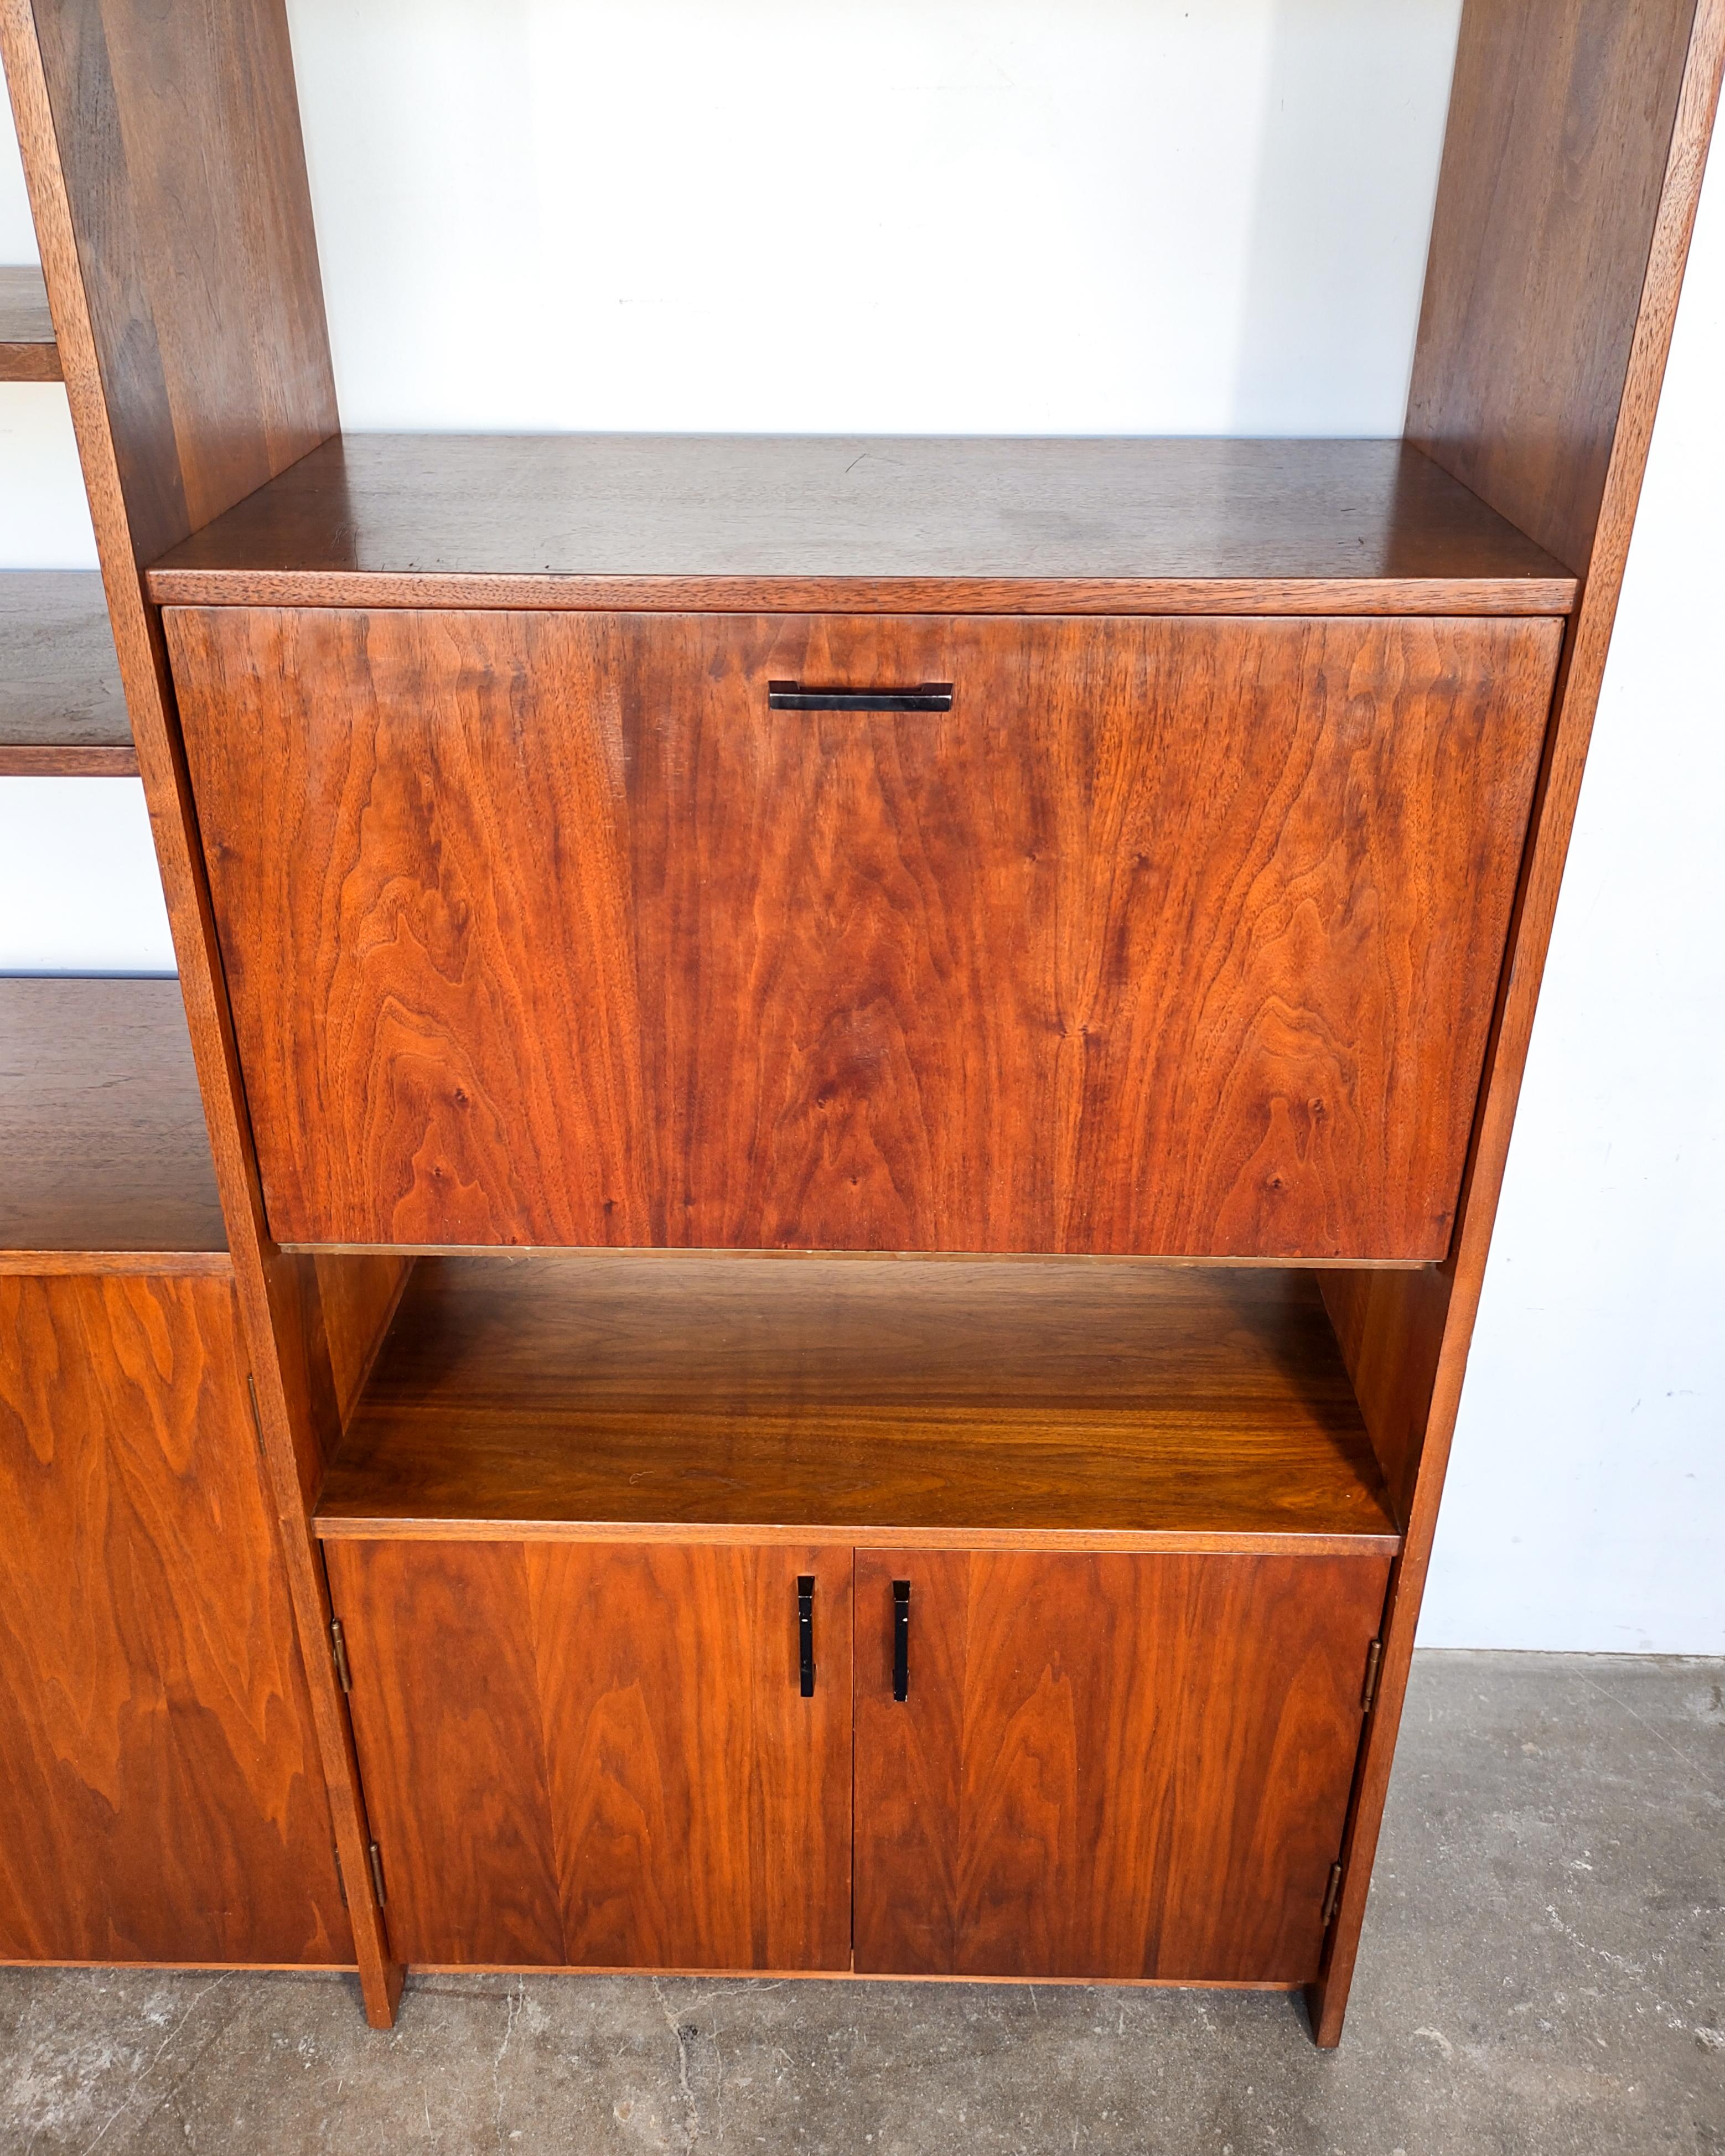 Unknown 1960s Mid-Century Modern Walnut Room Divider / Wall Unit with Drop-Down Desk